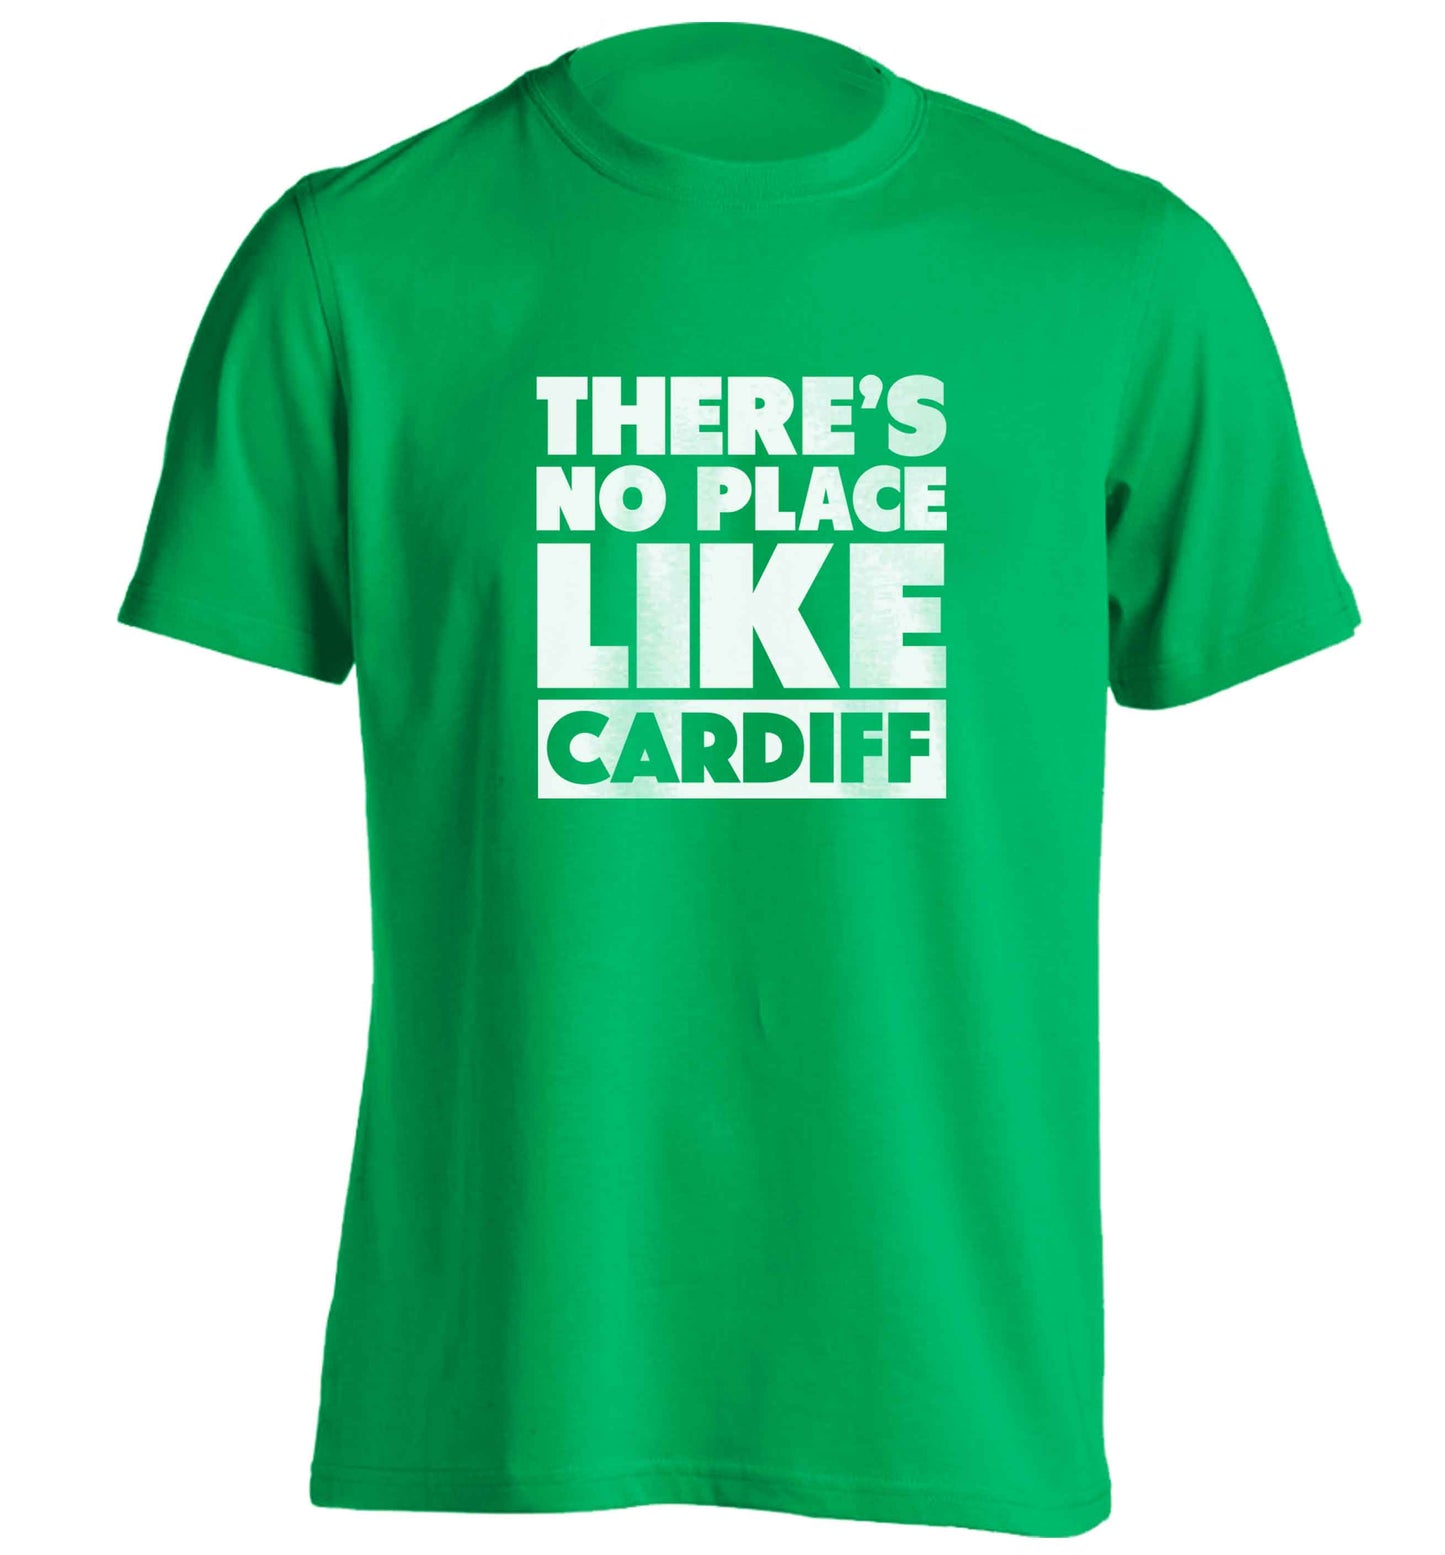 There's no place like Cardiff adults unisex green Tshirt 2XL